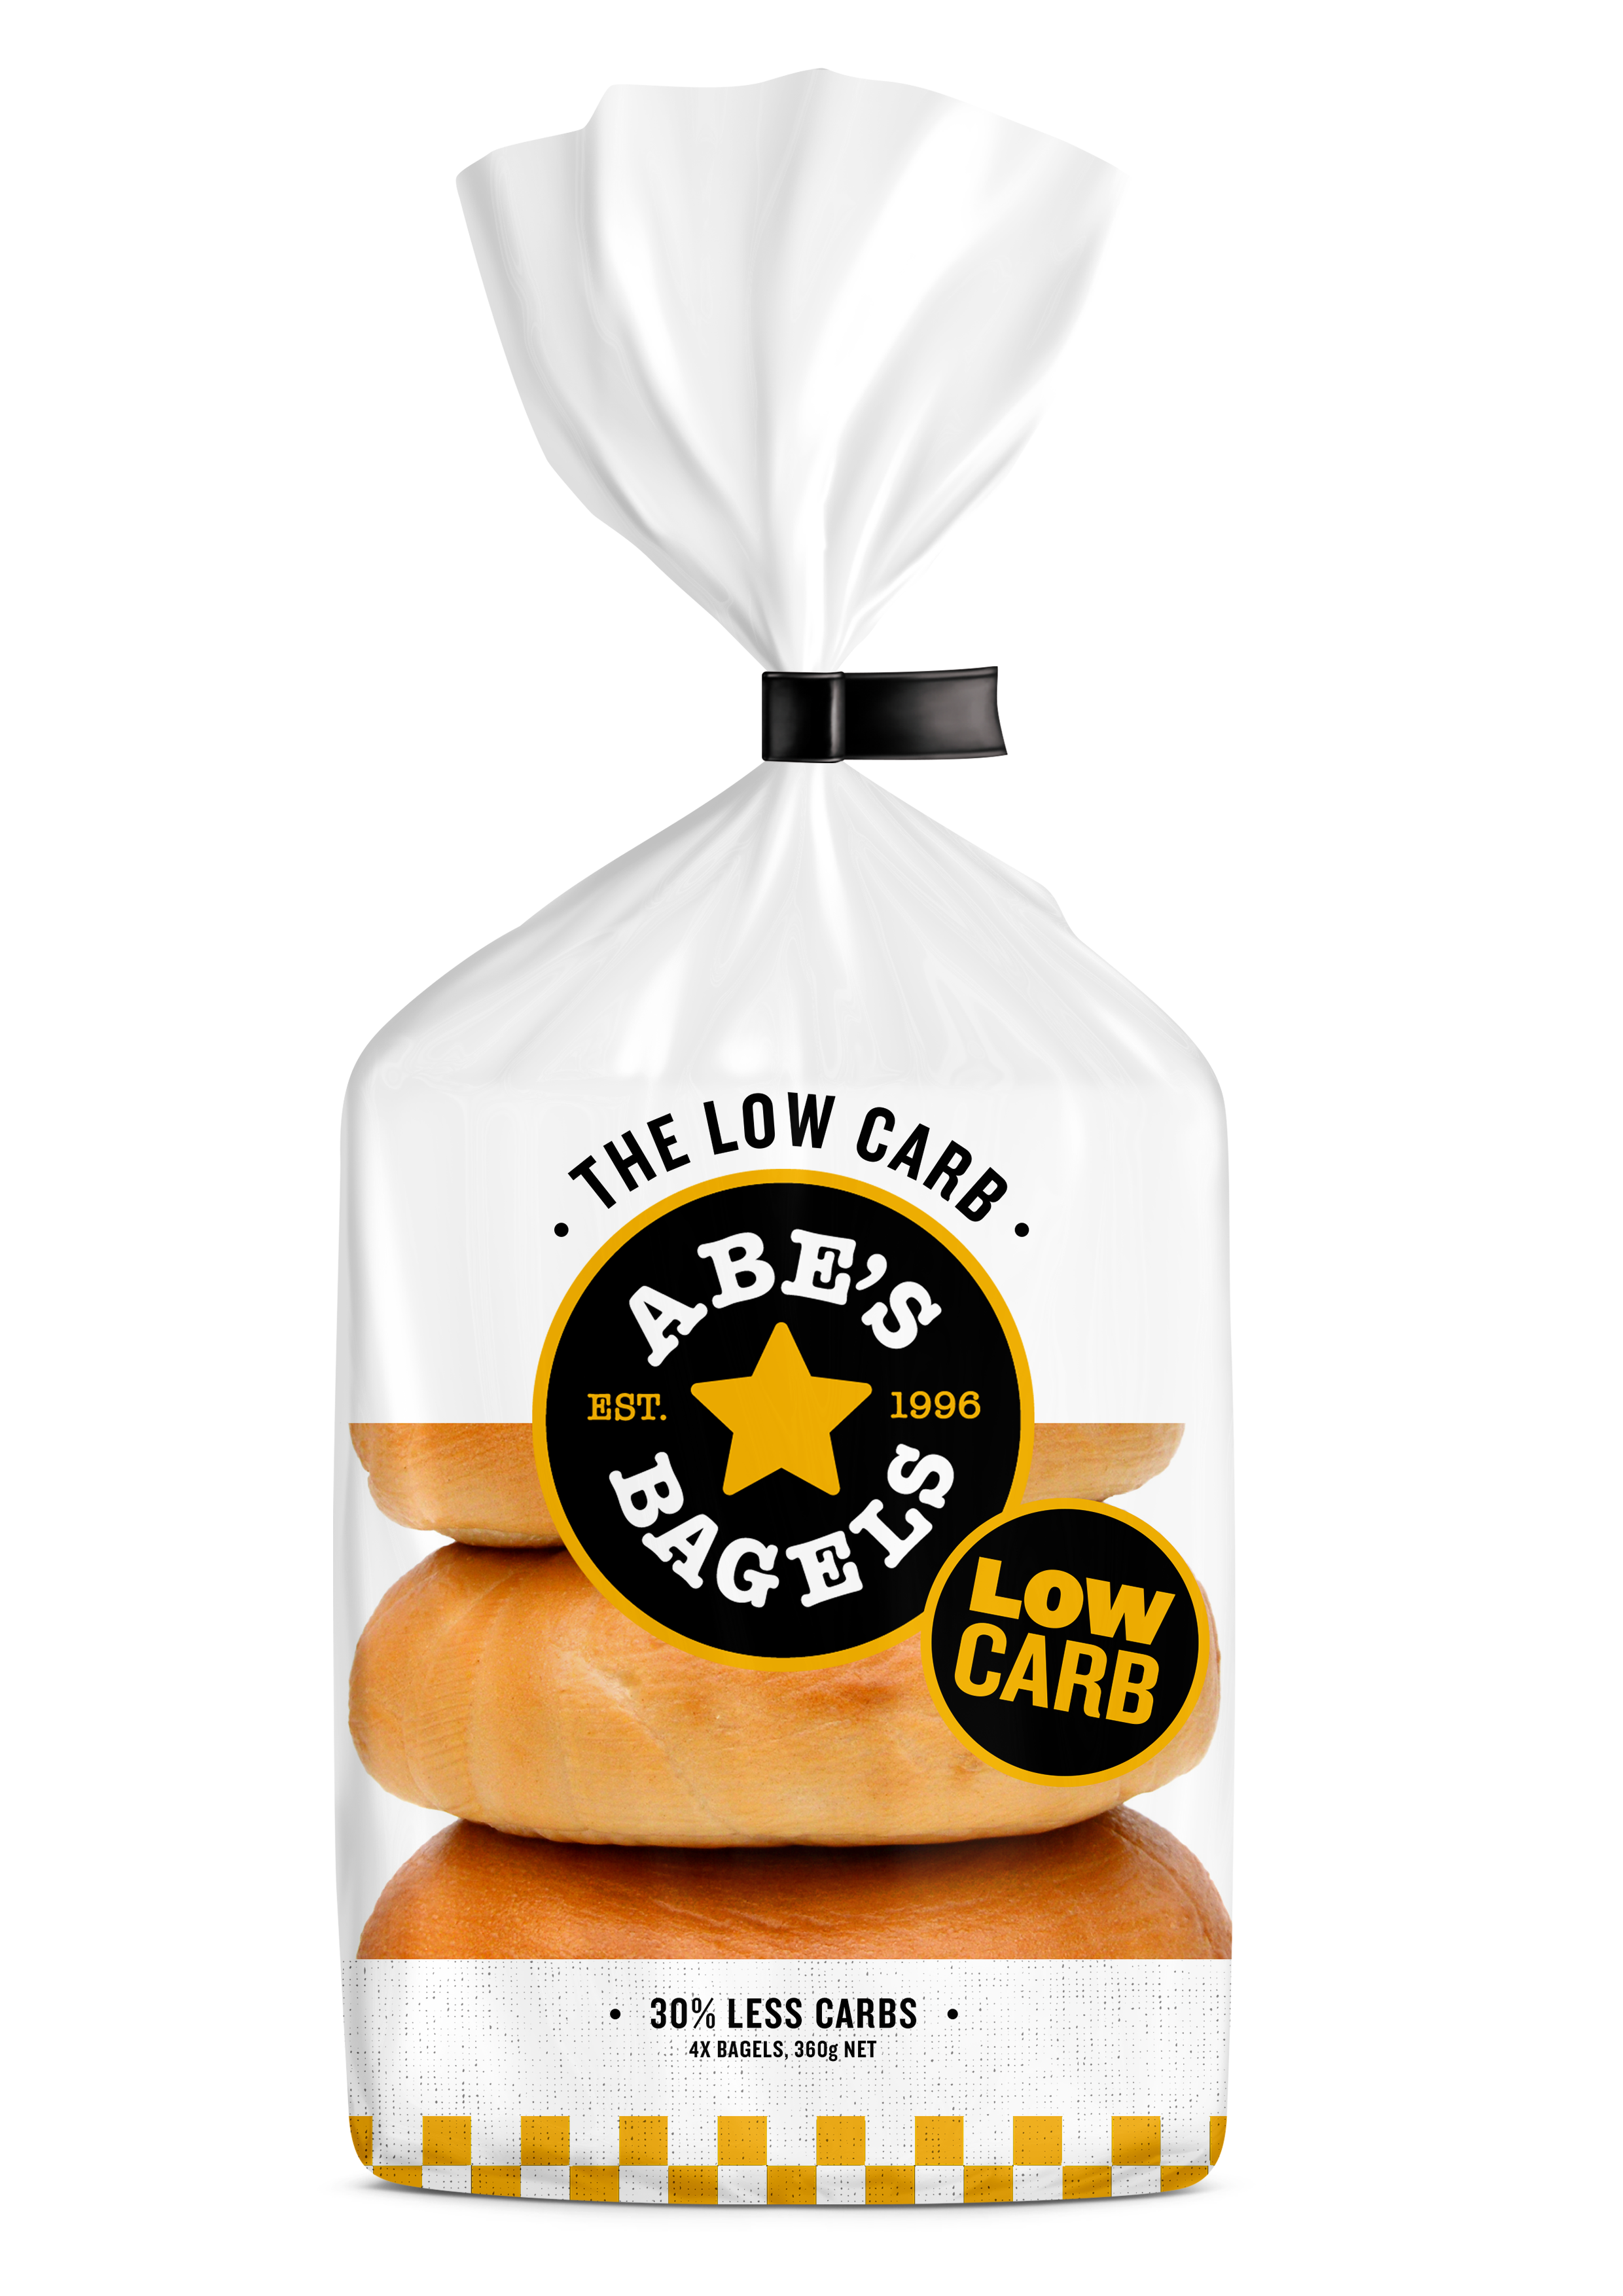 The Low Carb